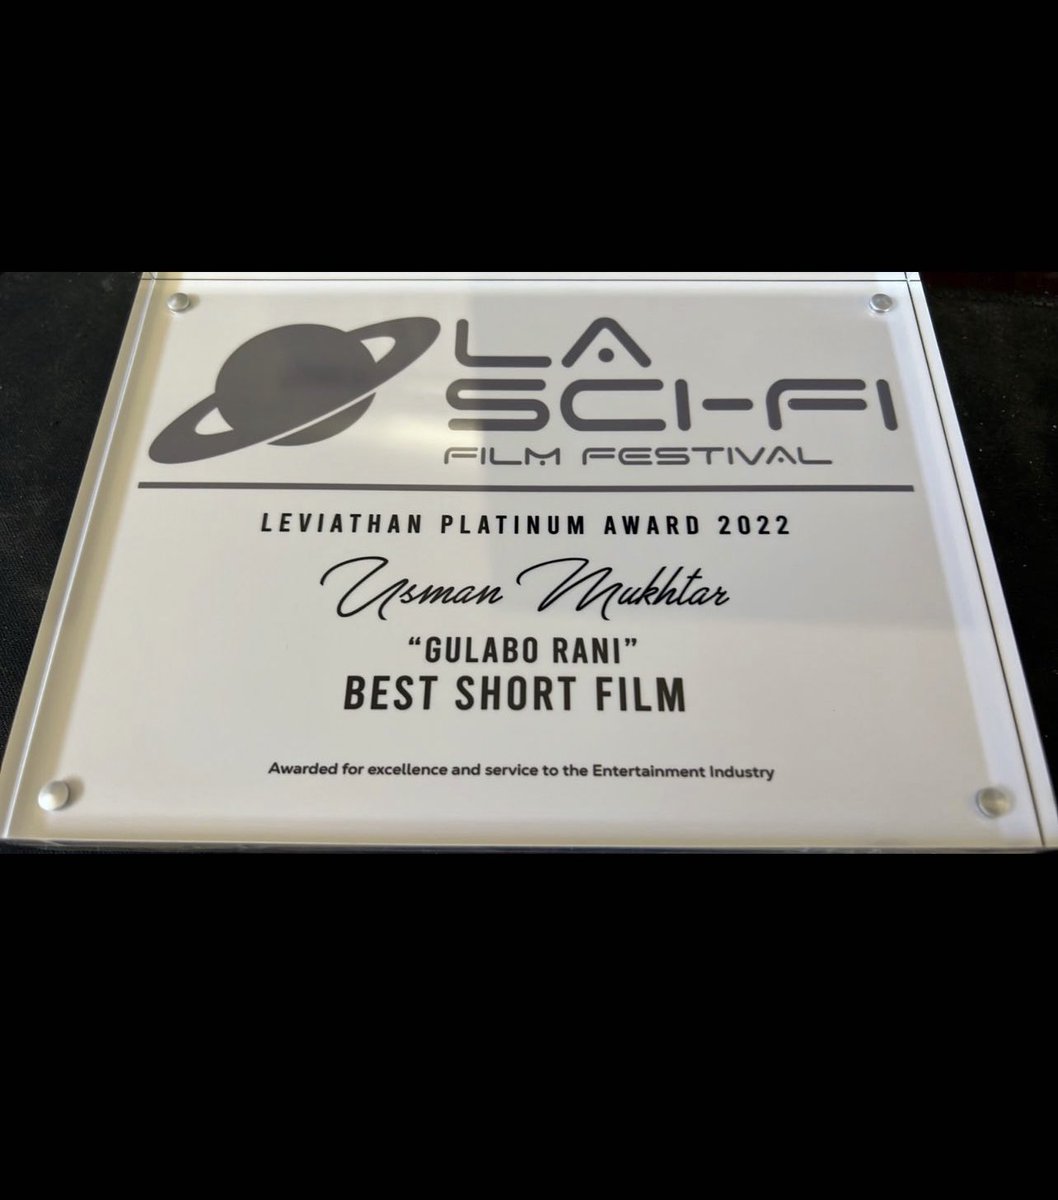 Super excited to announce that Gulabo Rani bagged Best Short Film at the L.A SCI-FI & HORROR Film Festival!! Super Proud of the entire team!!! #GulaboRani